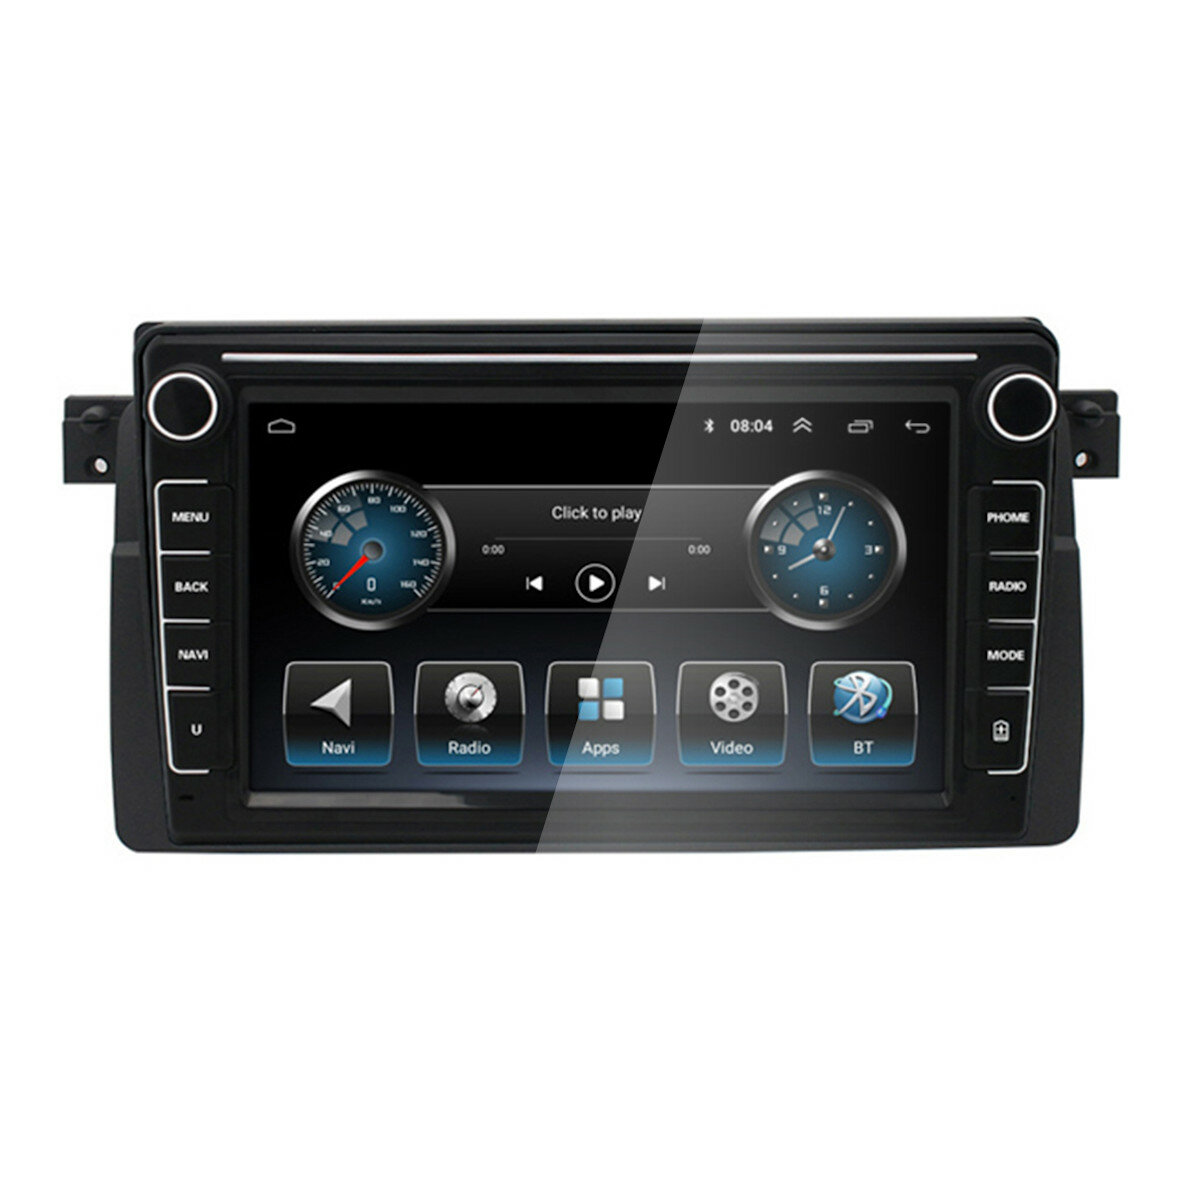 

9 Inch for Android 10.0 Car Radio 1+16G/2+32G GPS DSP FM WIFI bluetooth MP5 Player for BMW E46 1998-2005